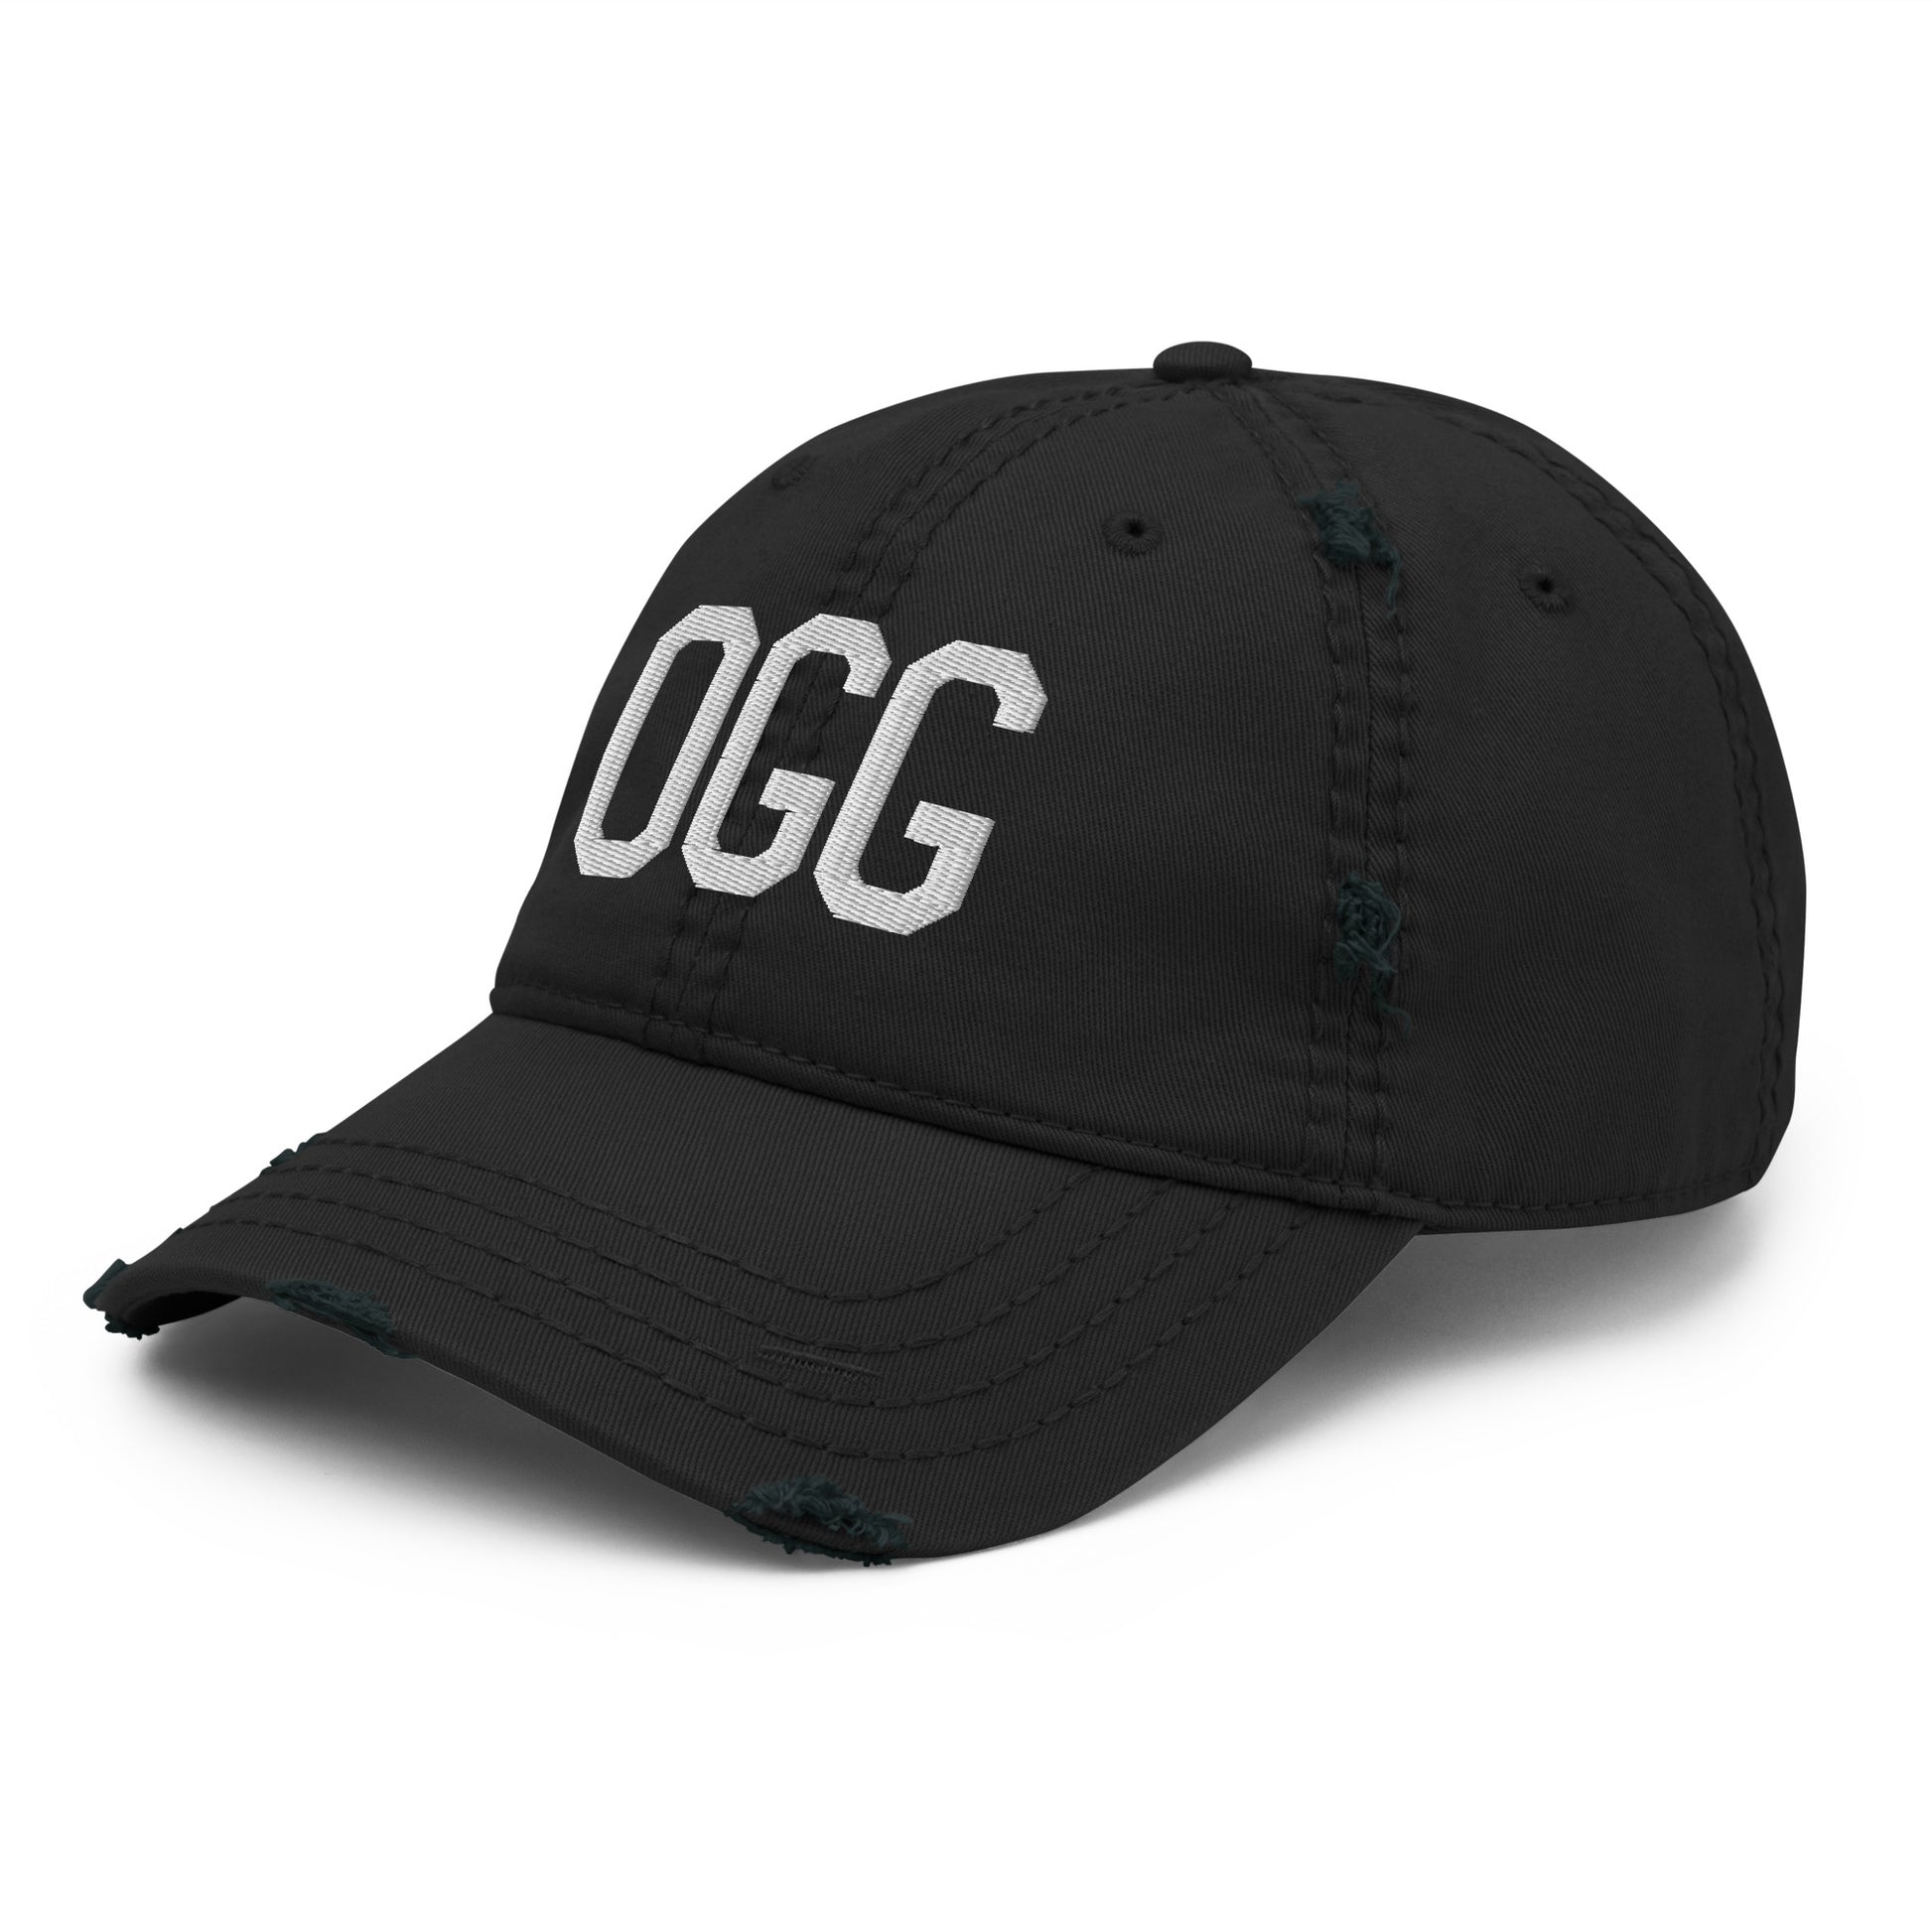 Airport Code Distressed Hat - White • OGG Maui • YHM Designs - Image 11